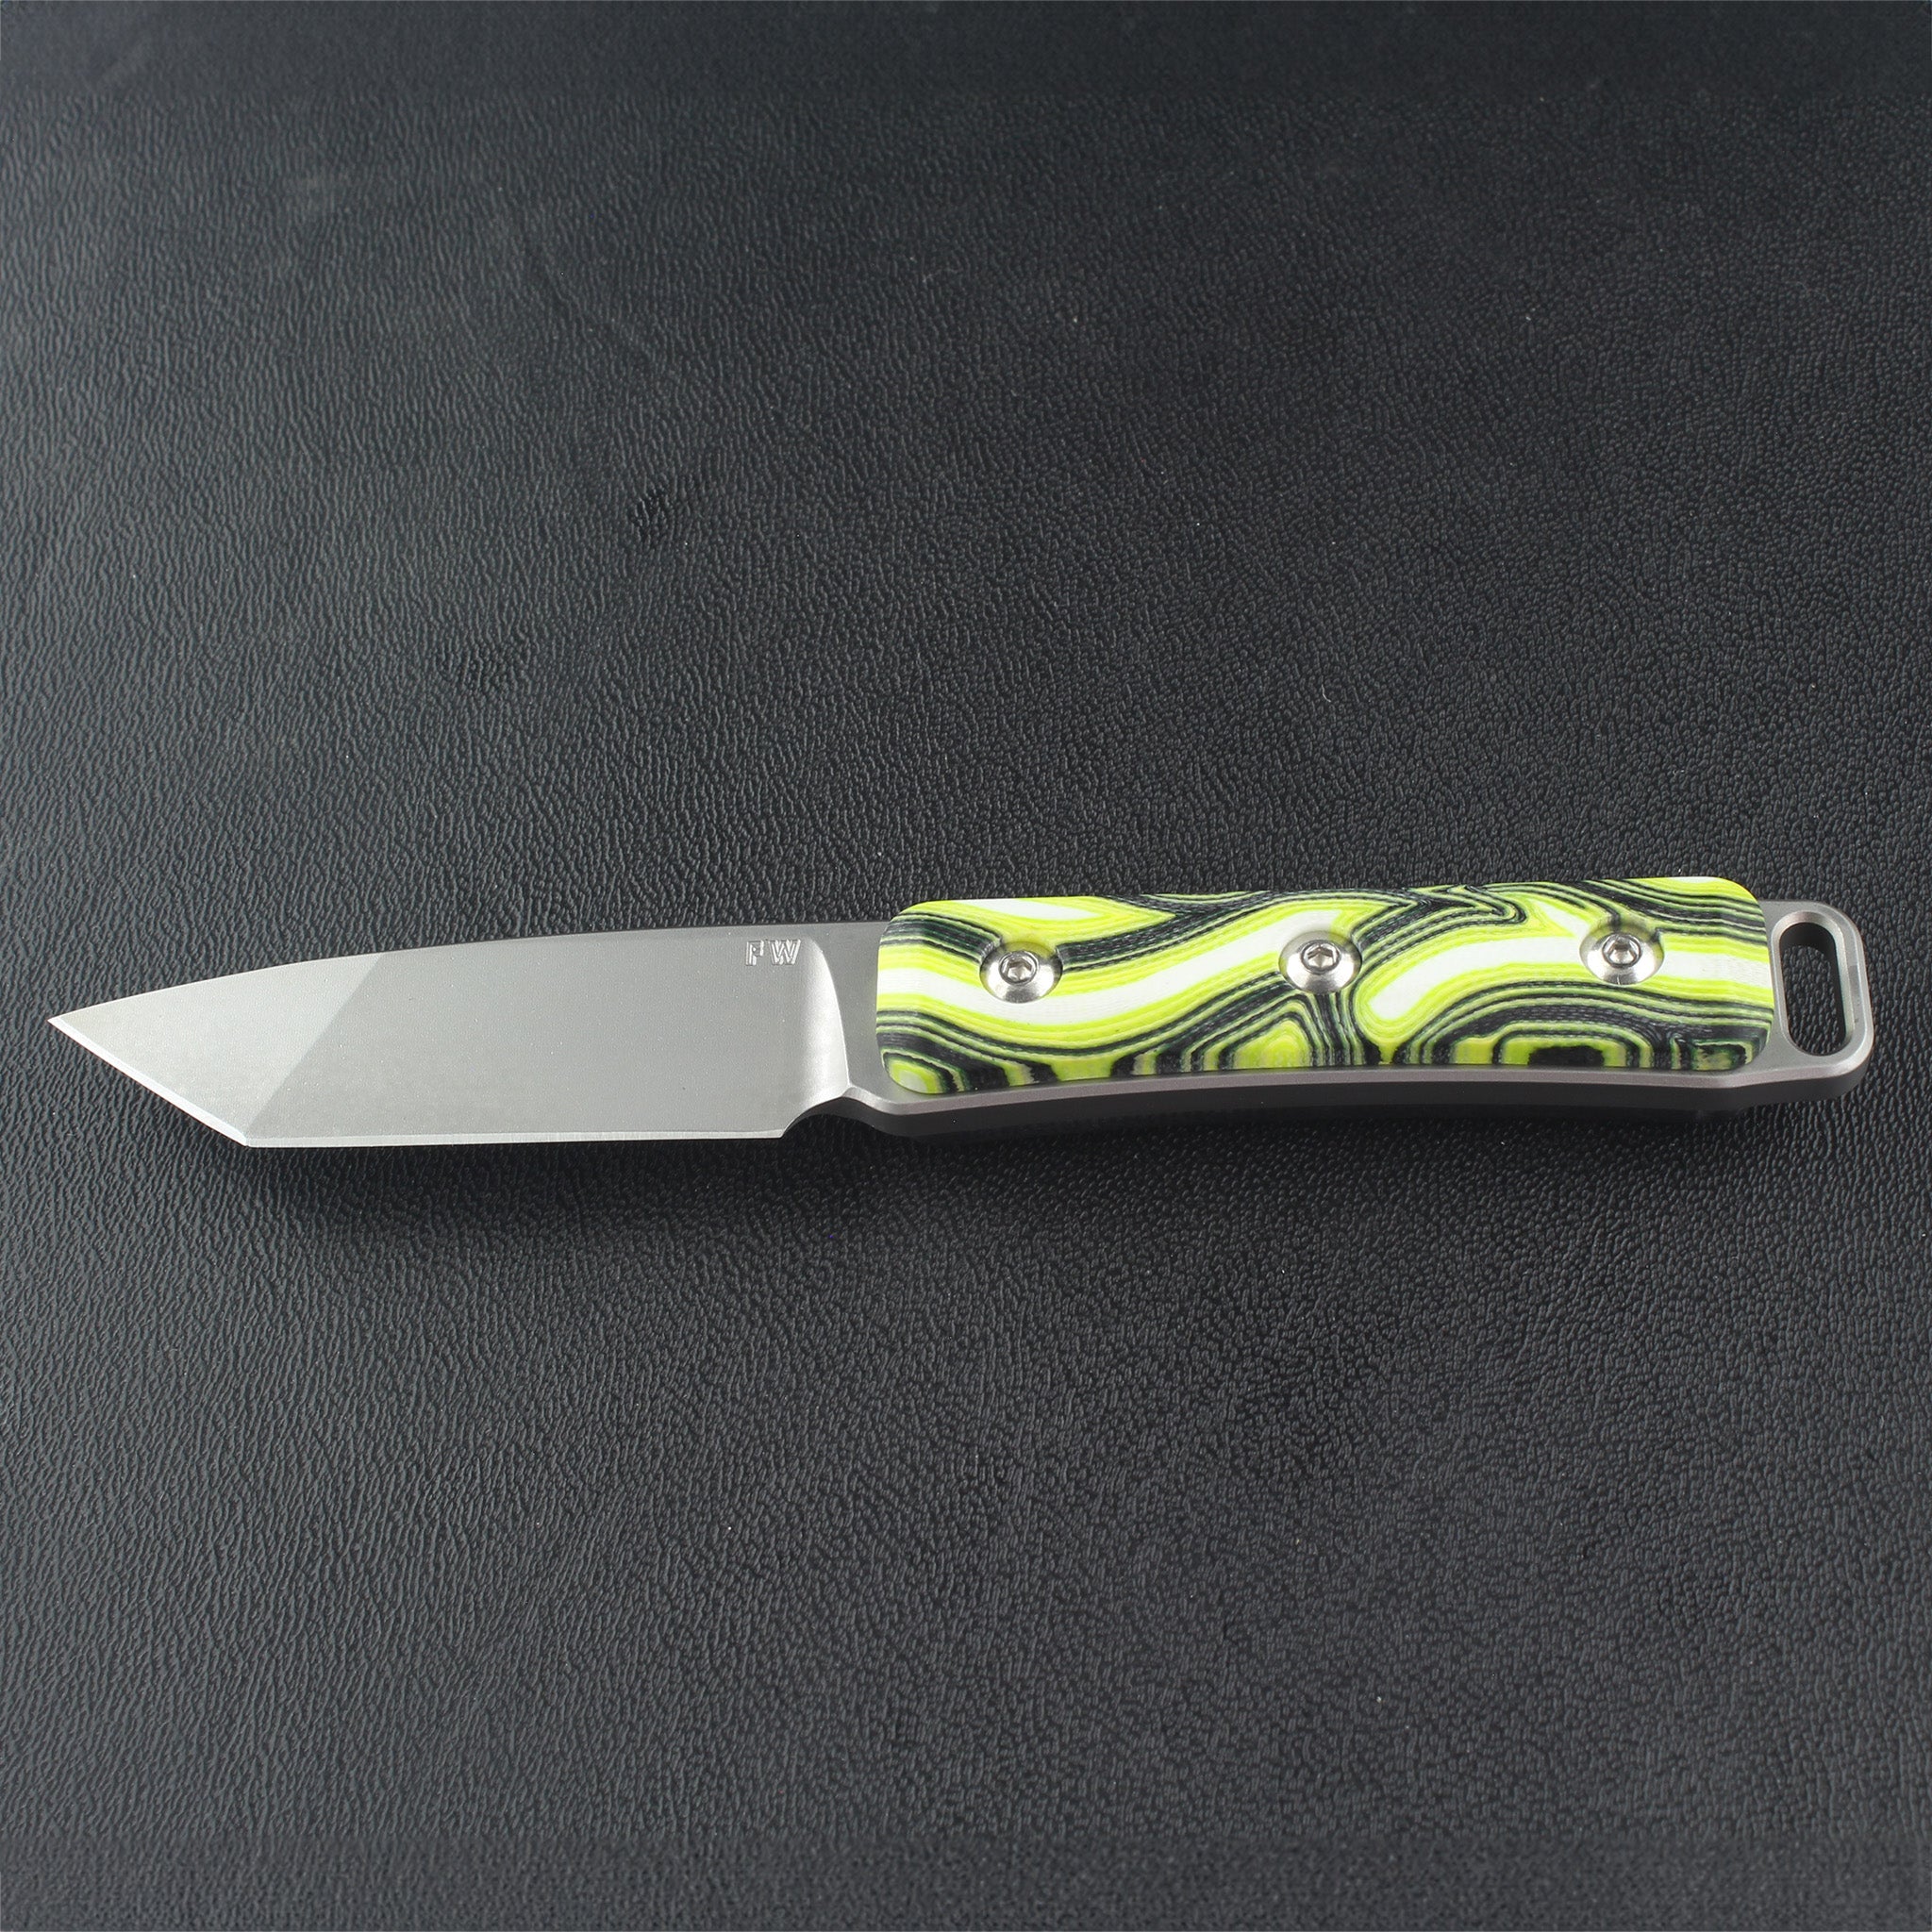 Gus Patterned G10 Handle